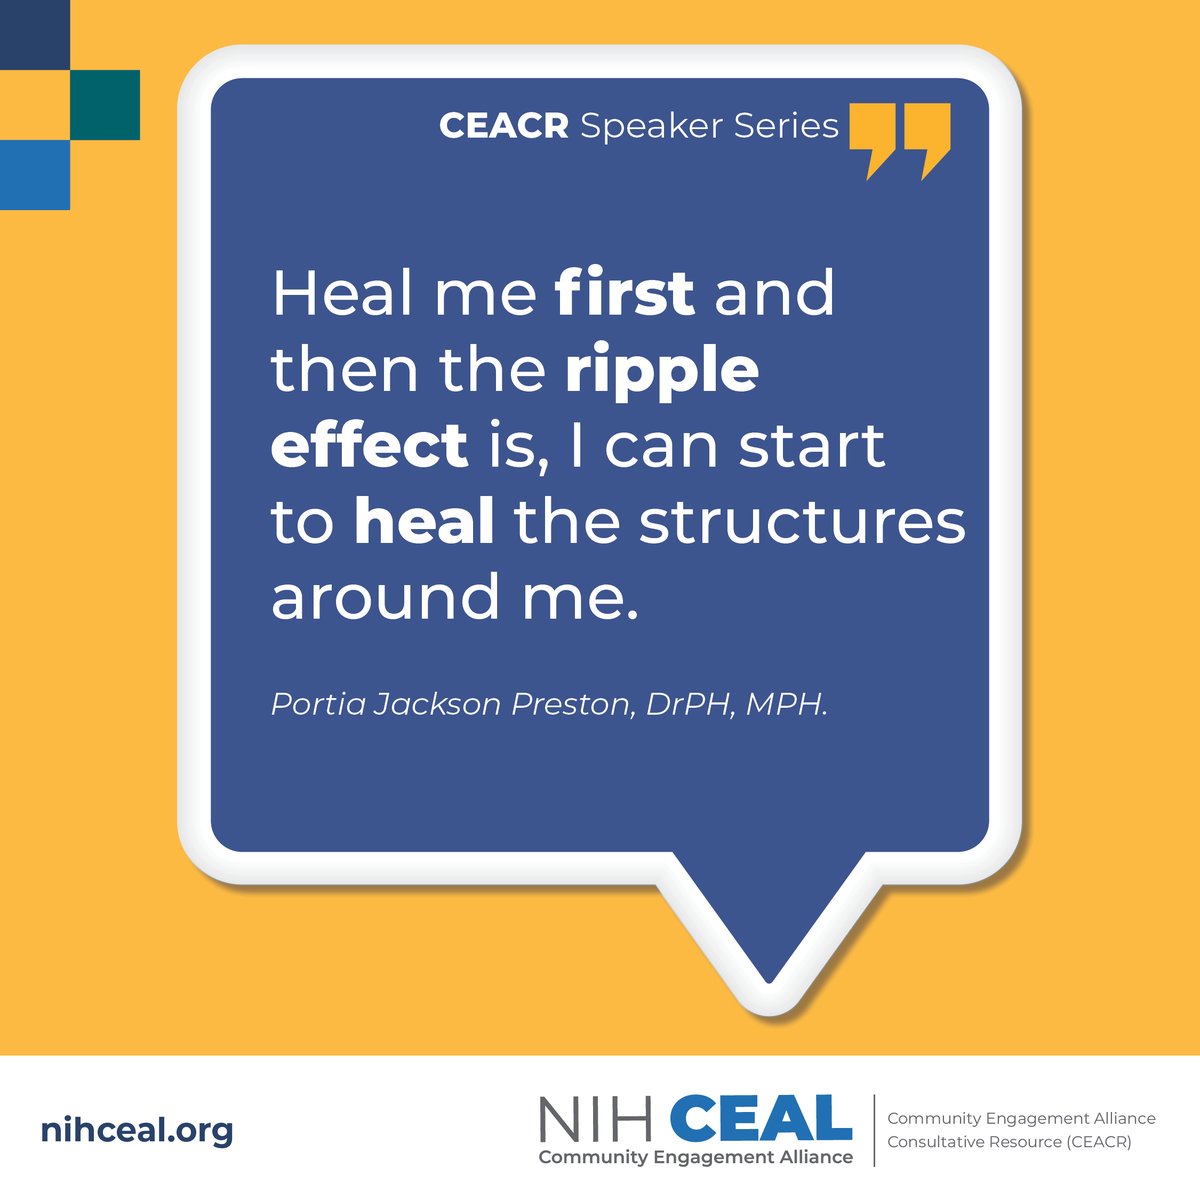 CEACR brought together leaders from @critica_life & @CalStateLA to discuss how to strengthen research reciprocity and how they promote self-care in their work. Listen to the full conversation and explore more of CECAR's webinars: bit.ly/3Det7IQ #MHAM2024